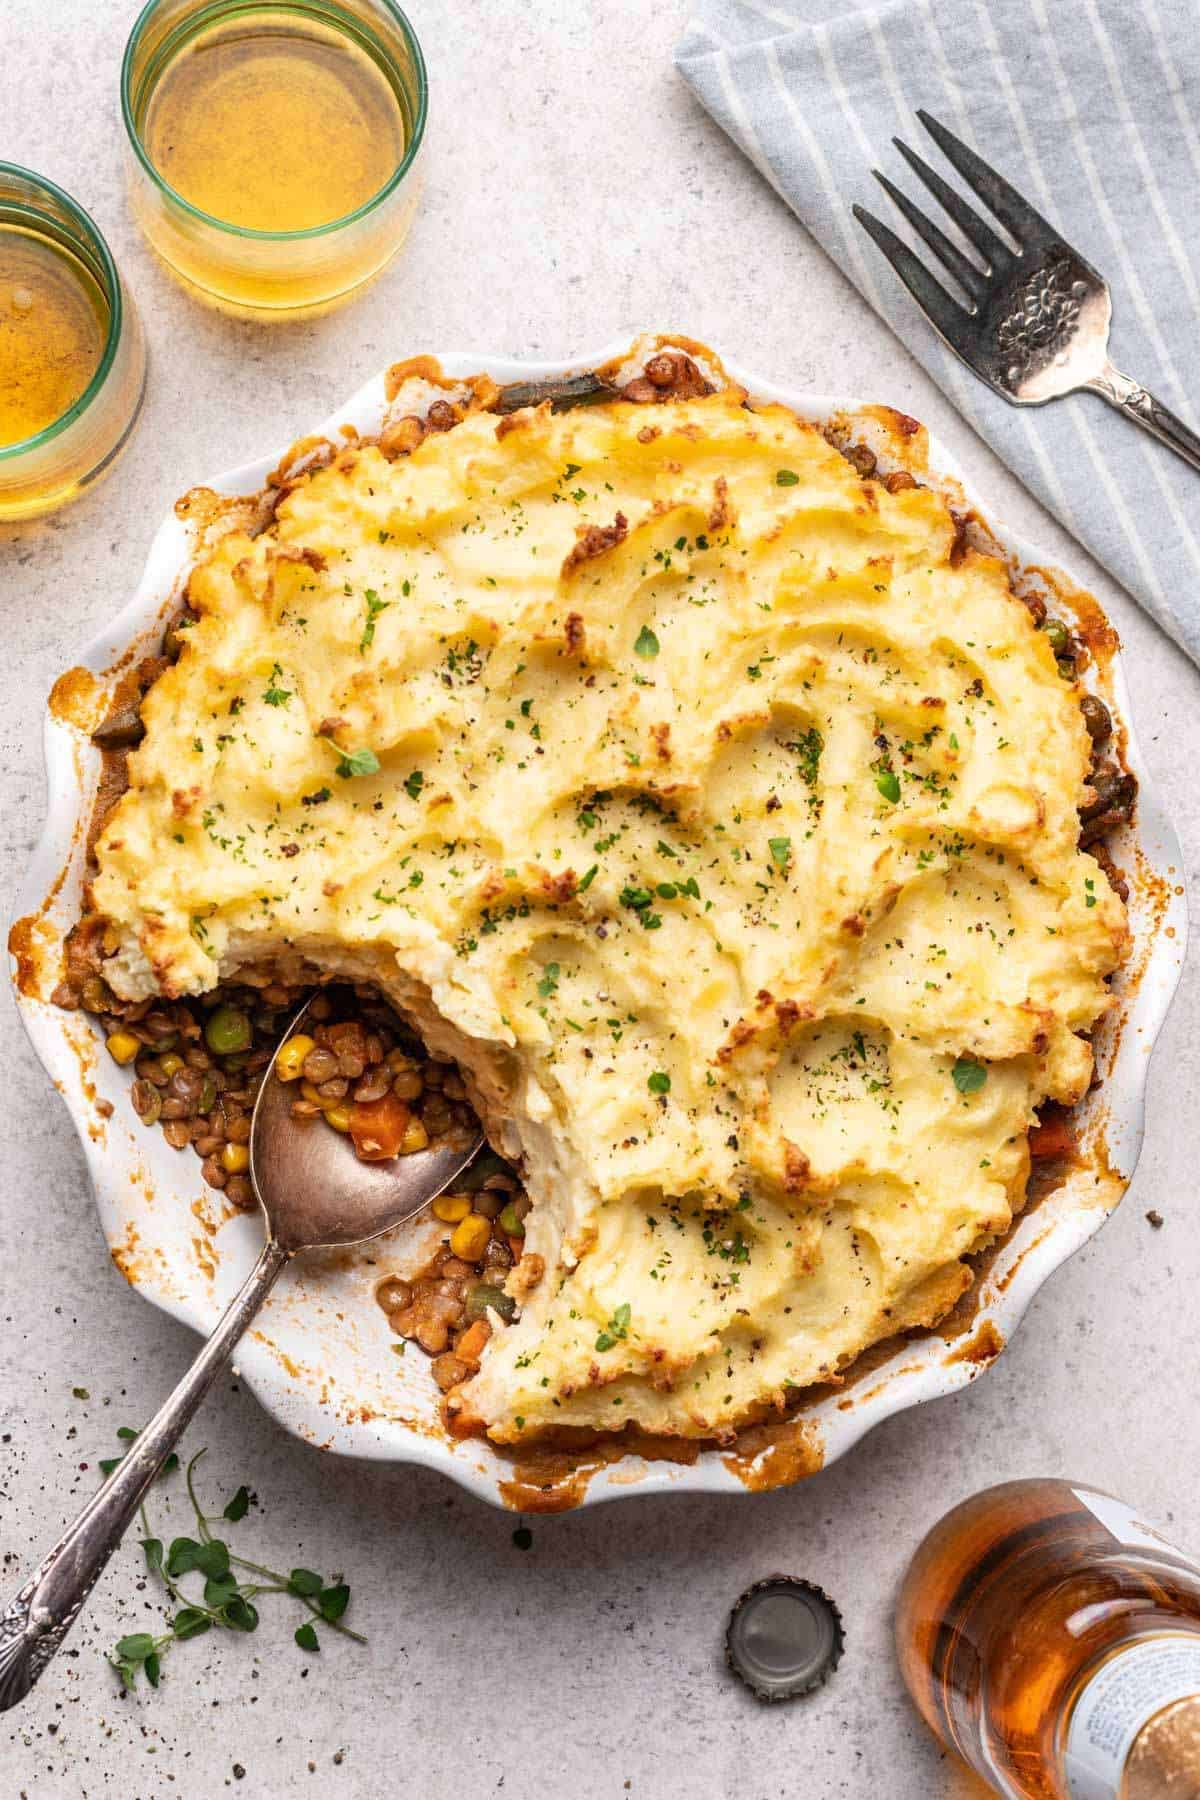 Pie dish with baked shepherd's pie and a scoop taken out for serving.